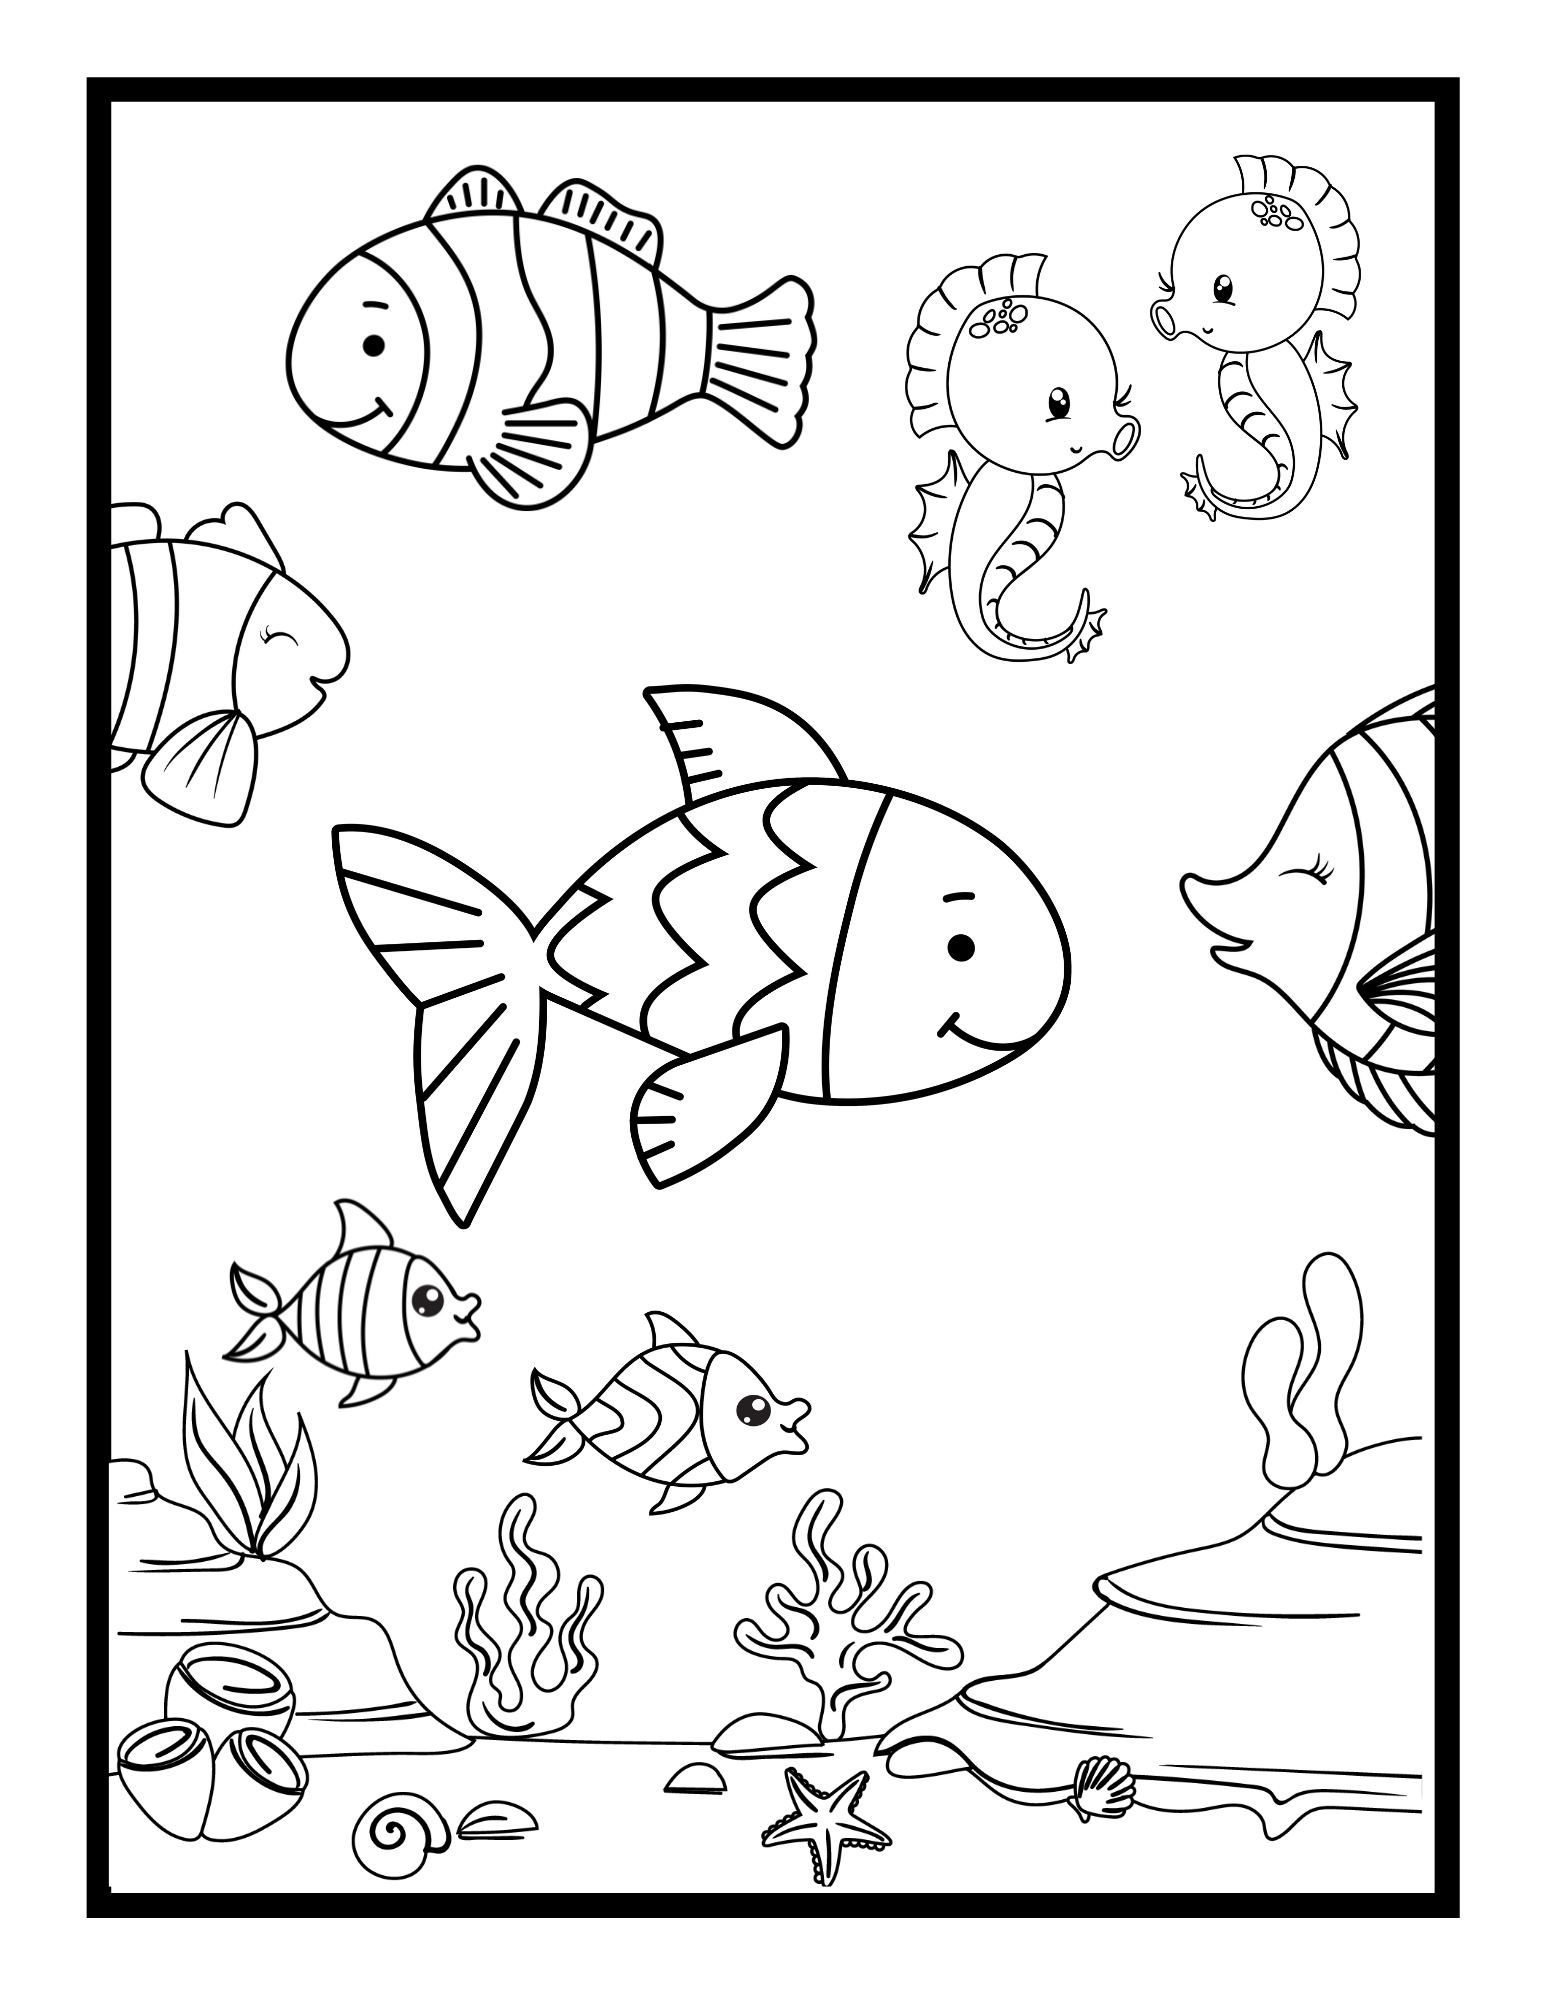 Free Coloring Pages With Different Themes For Coloring Enthusiasts ...